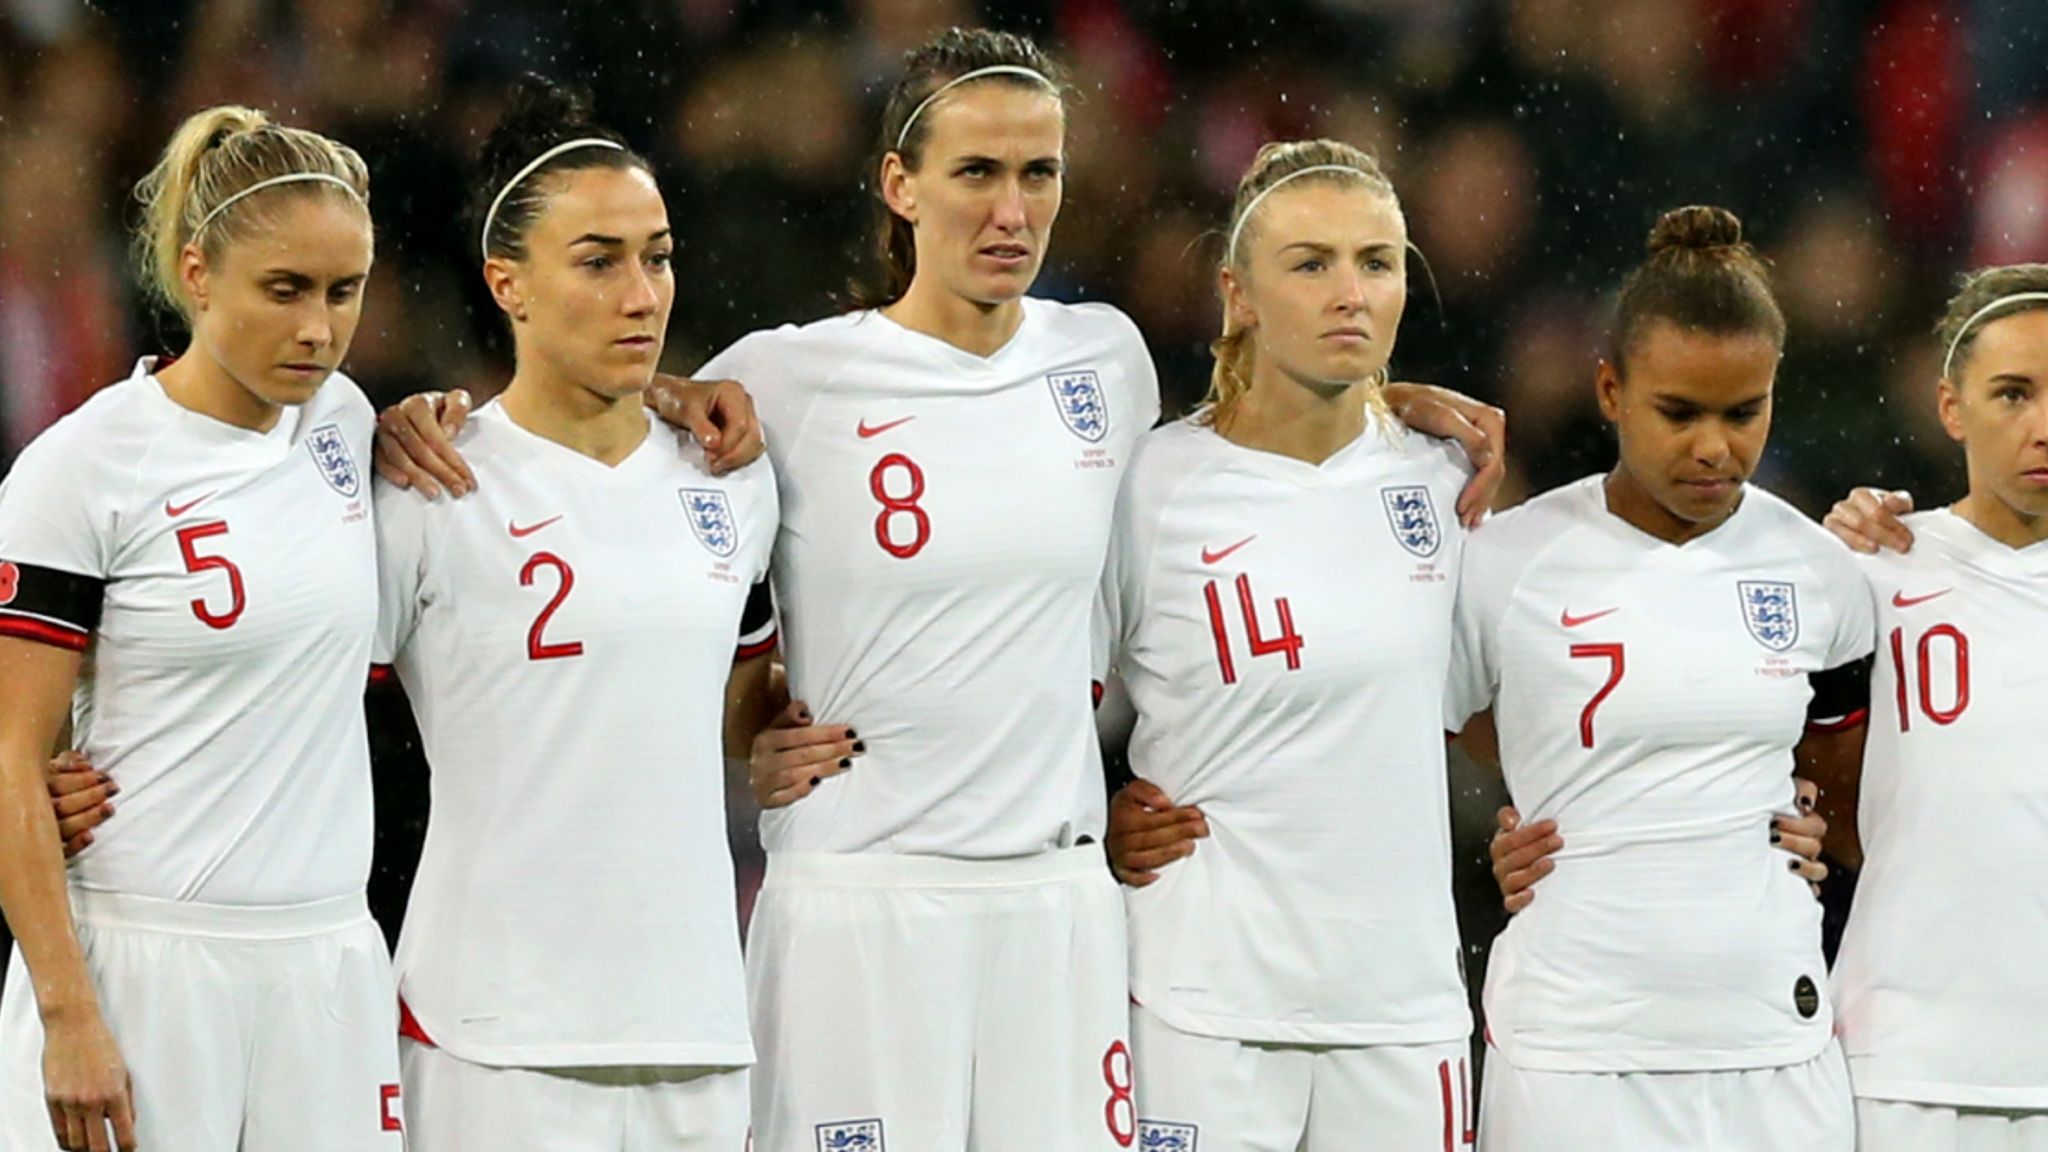 England Women to fly in premium economy to USA for SheBelieves Cup defence